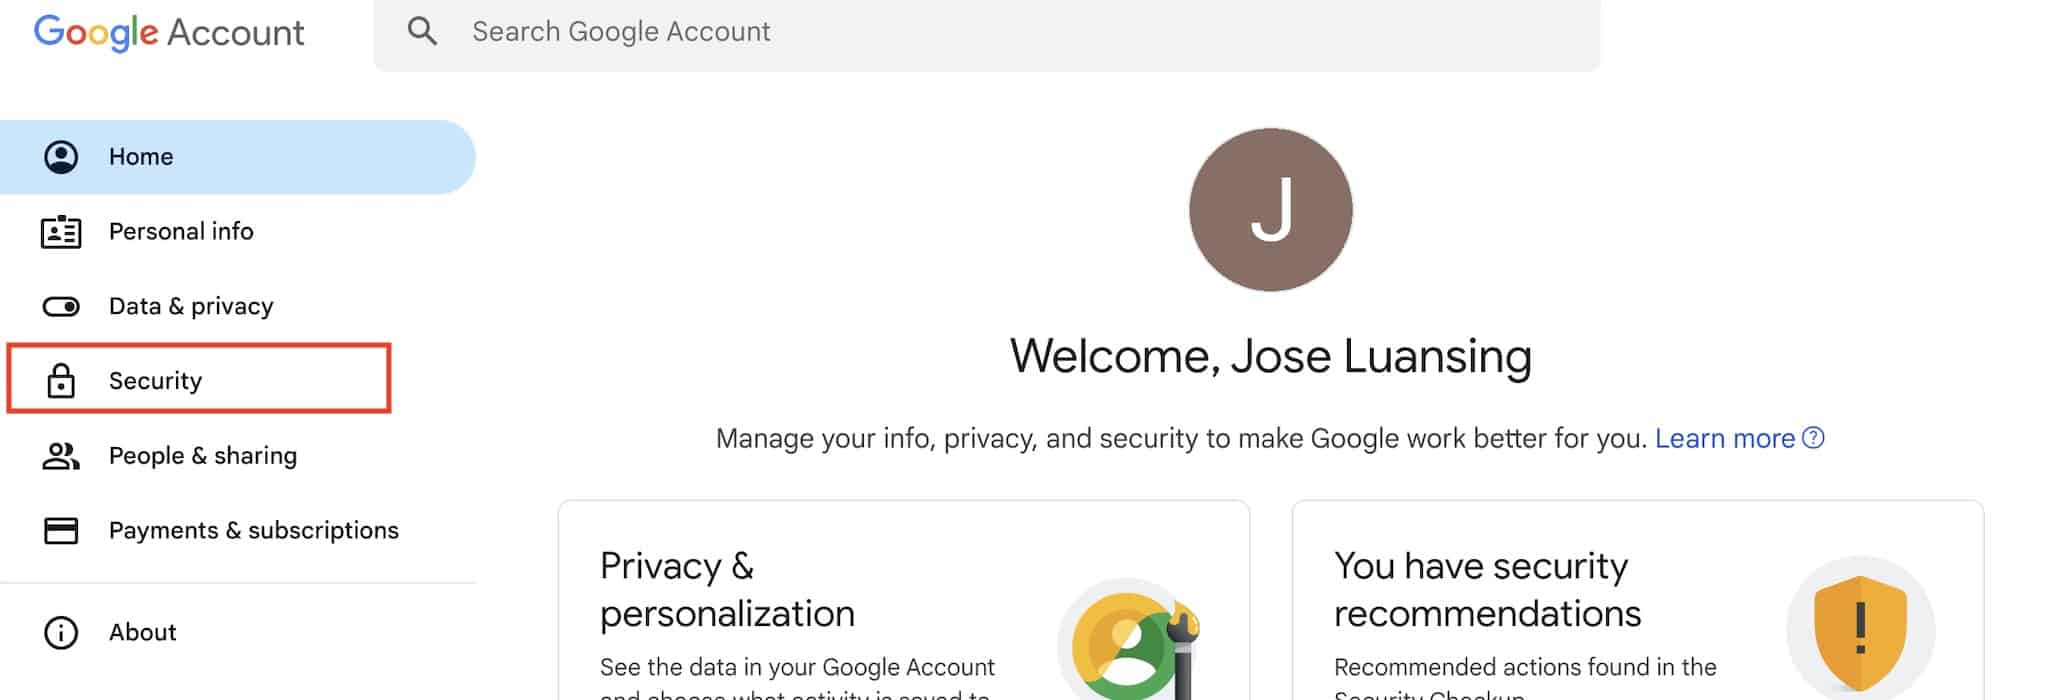 Adjusting the Security Section of My Account on Google